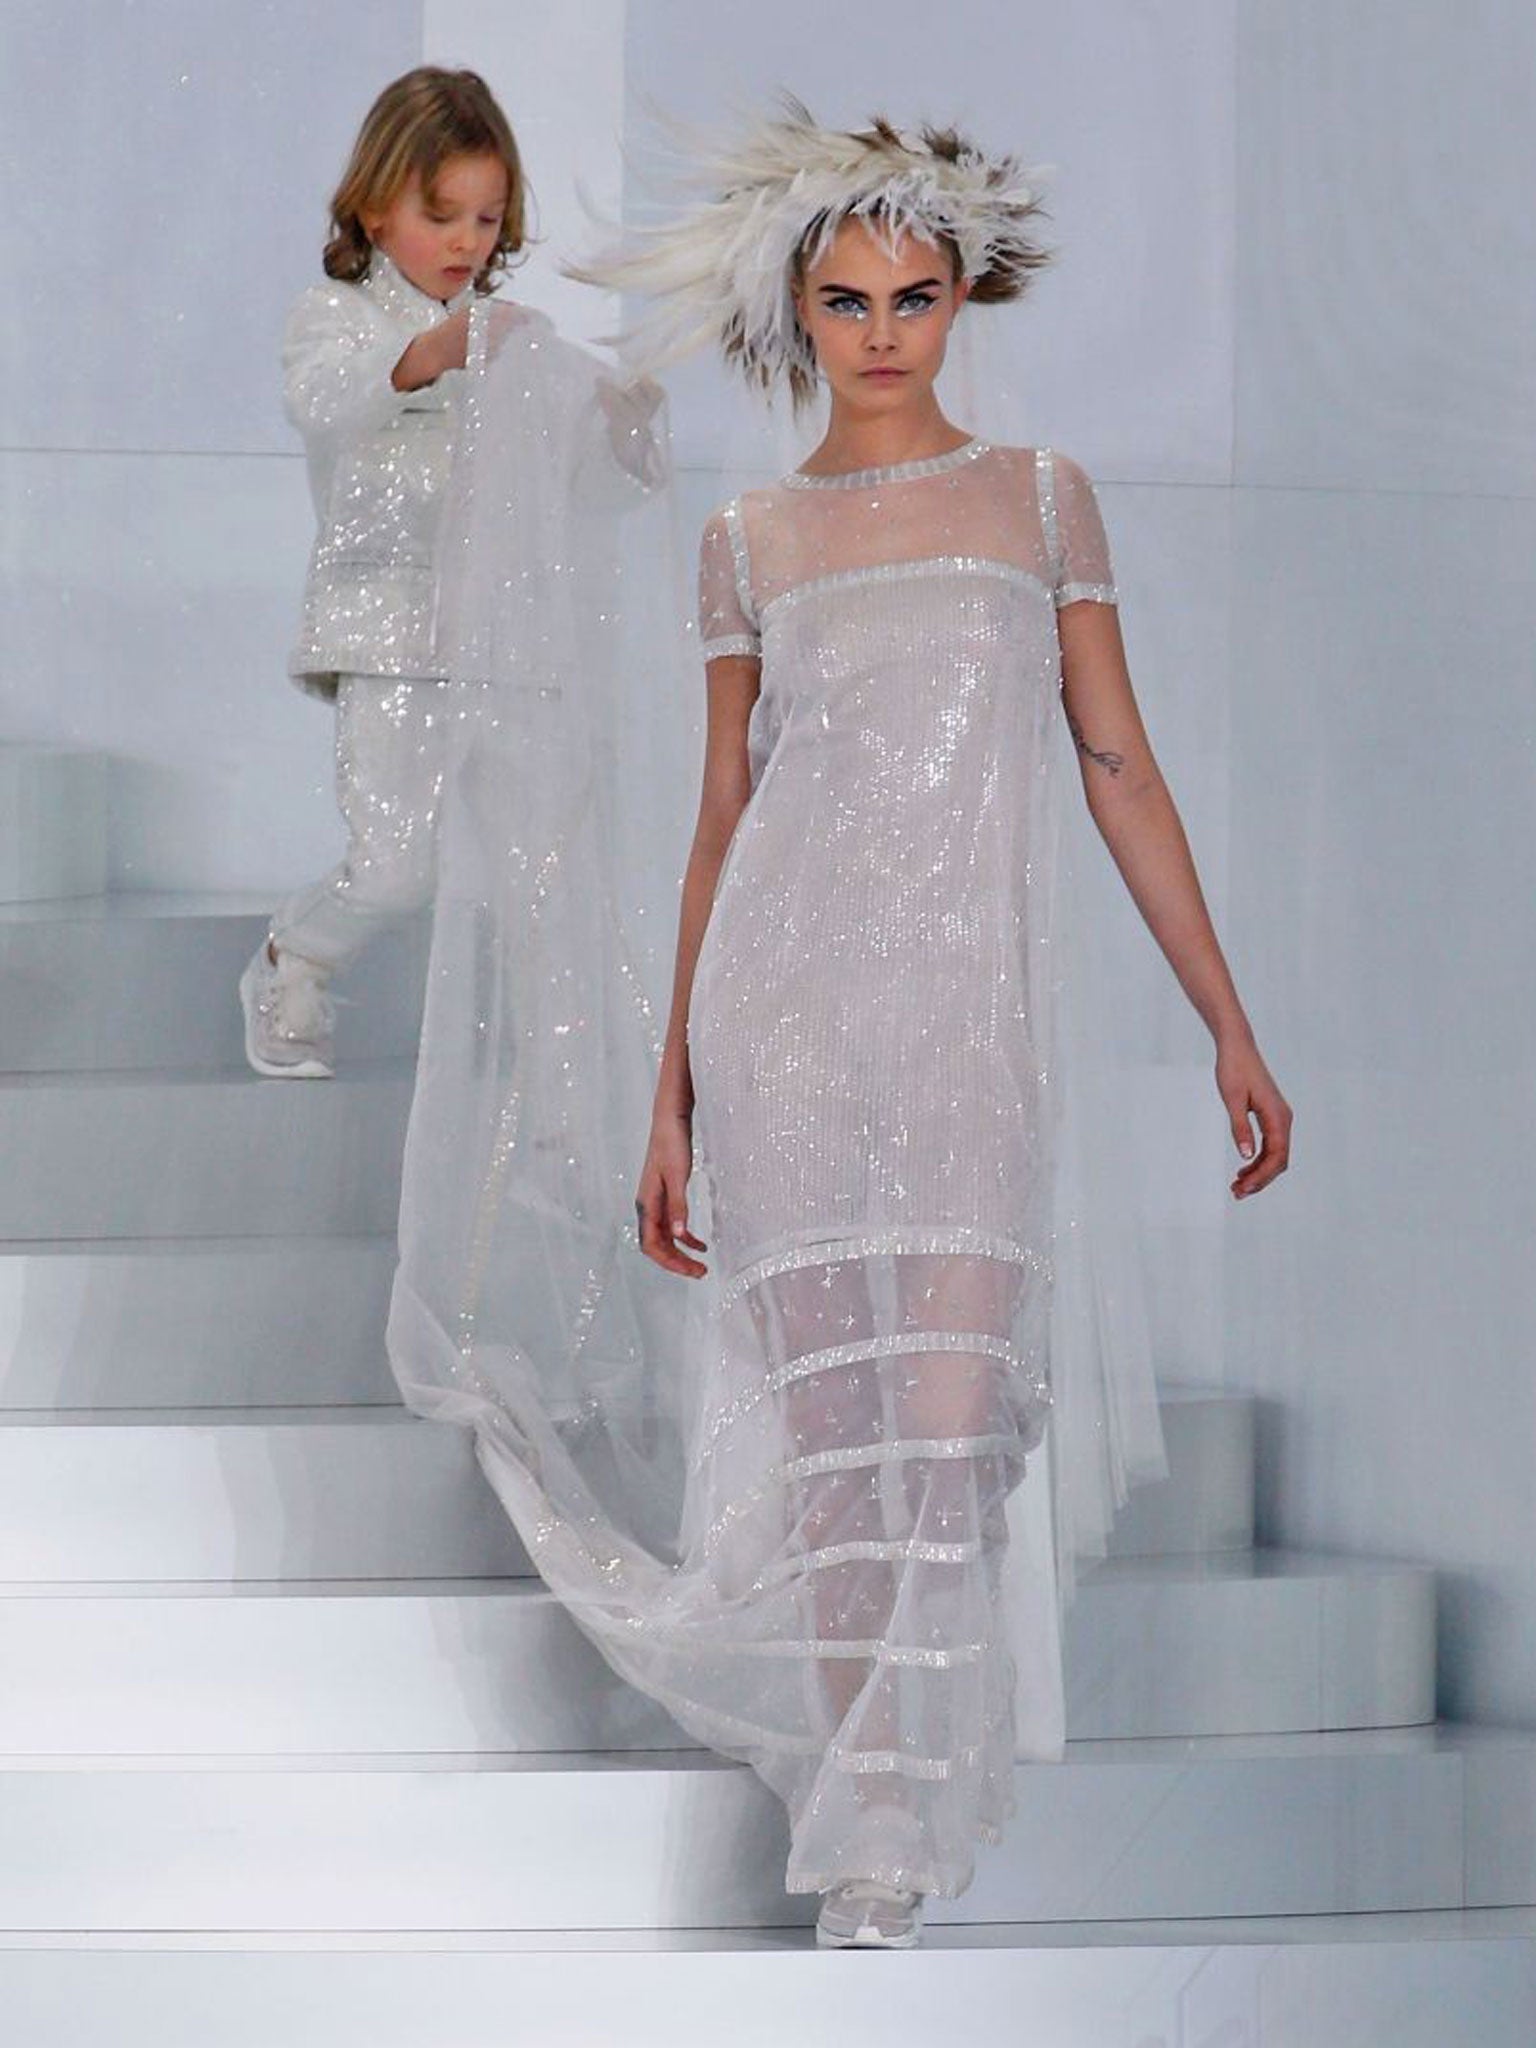 Cara Delevingne presents a creation from the Spring/Summer 2014 Haute Couture collection by German designer Karl Lagerfeld for Chanel fashion house during the Paris Fashion Week